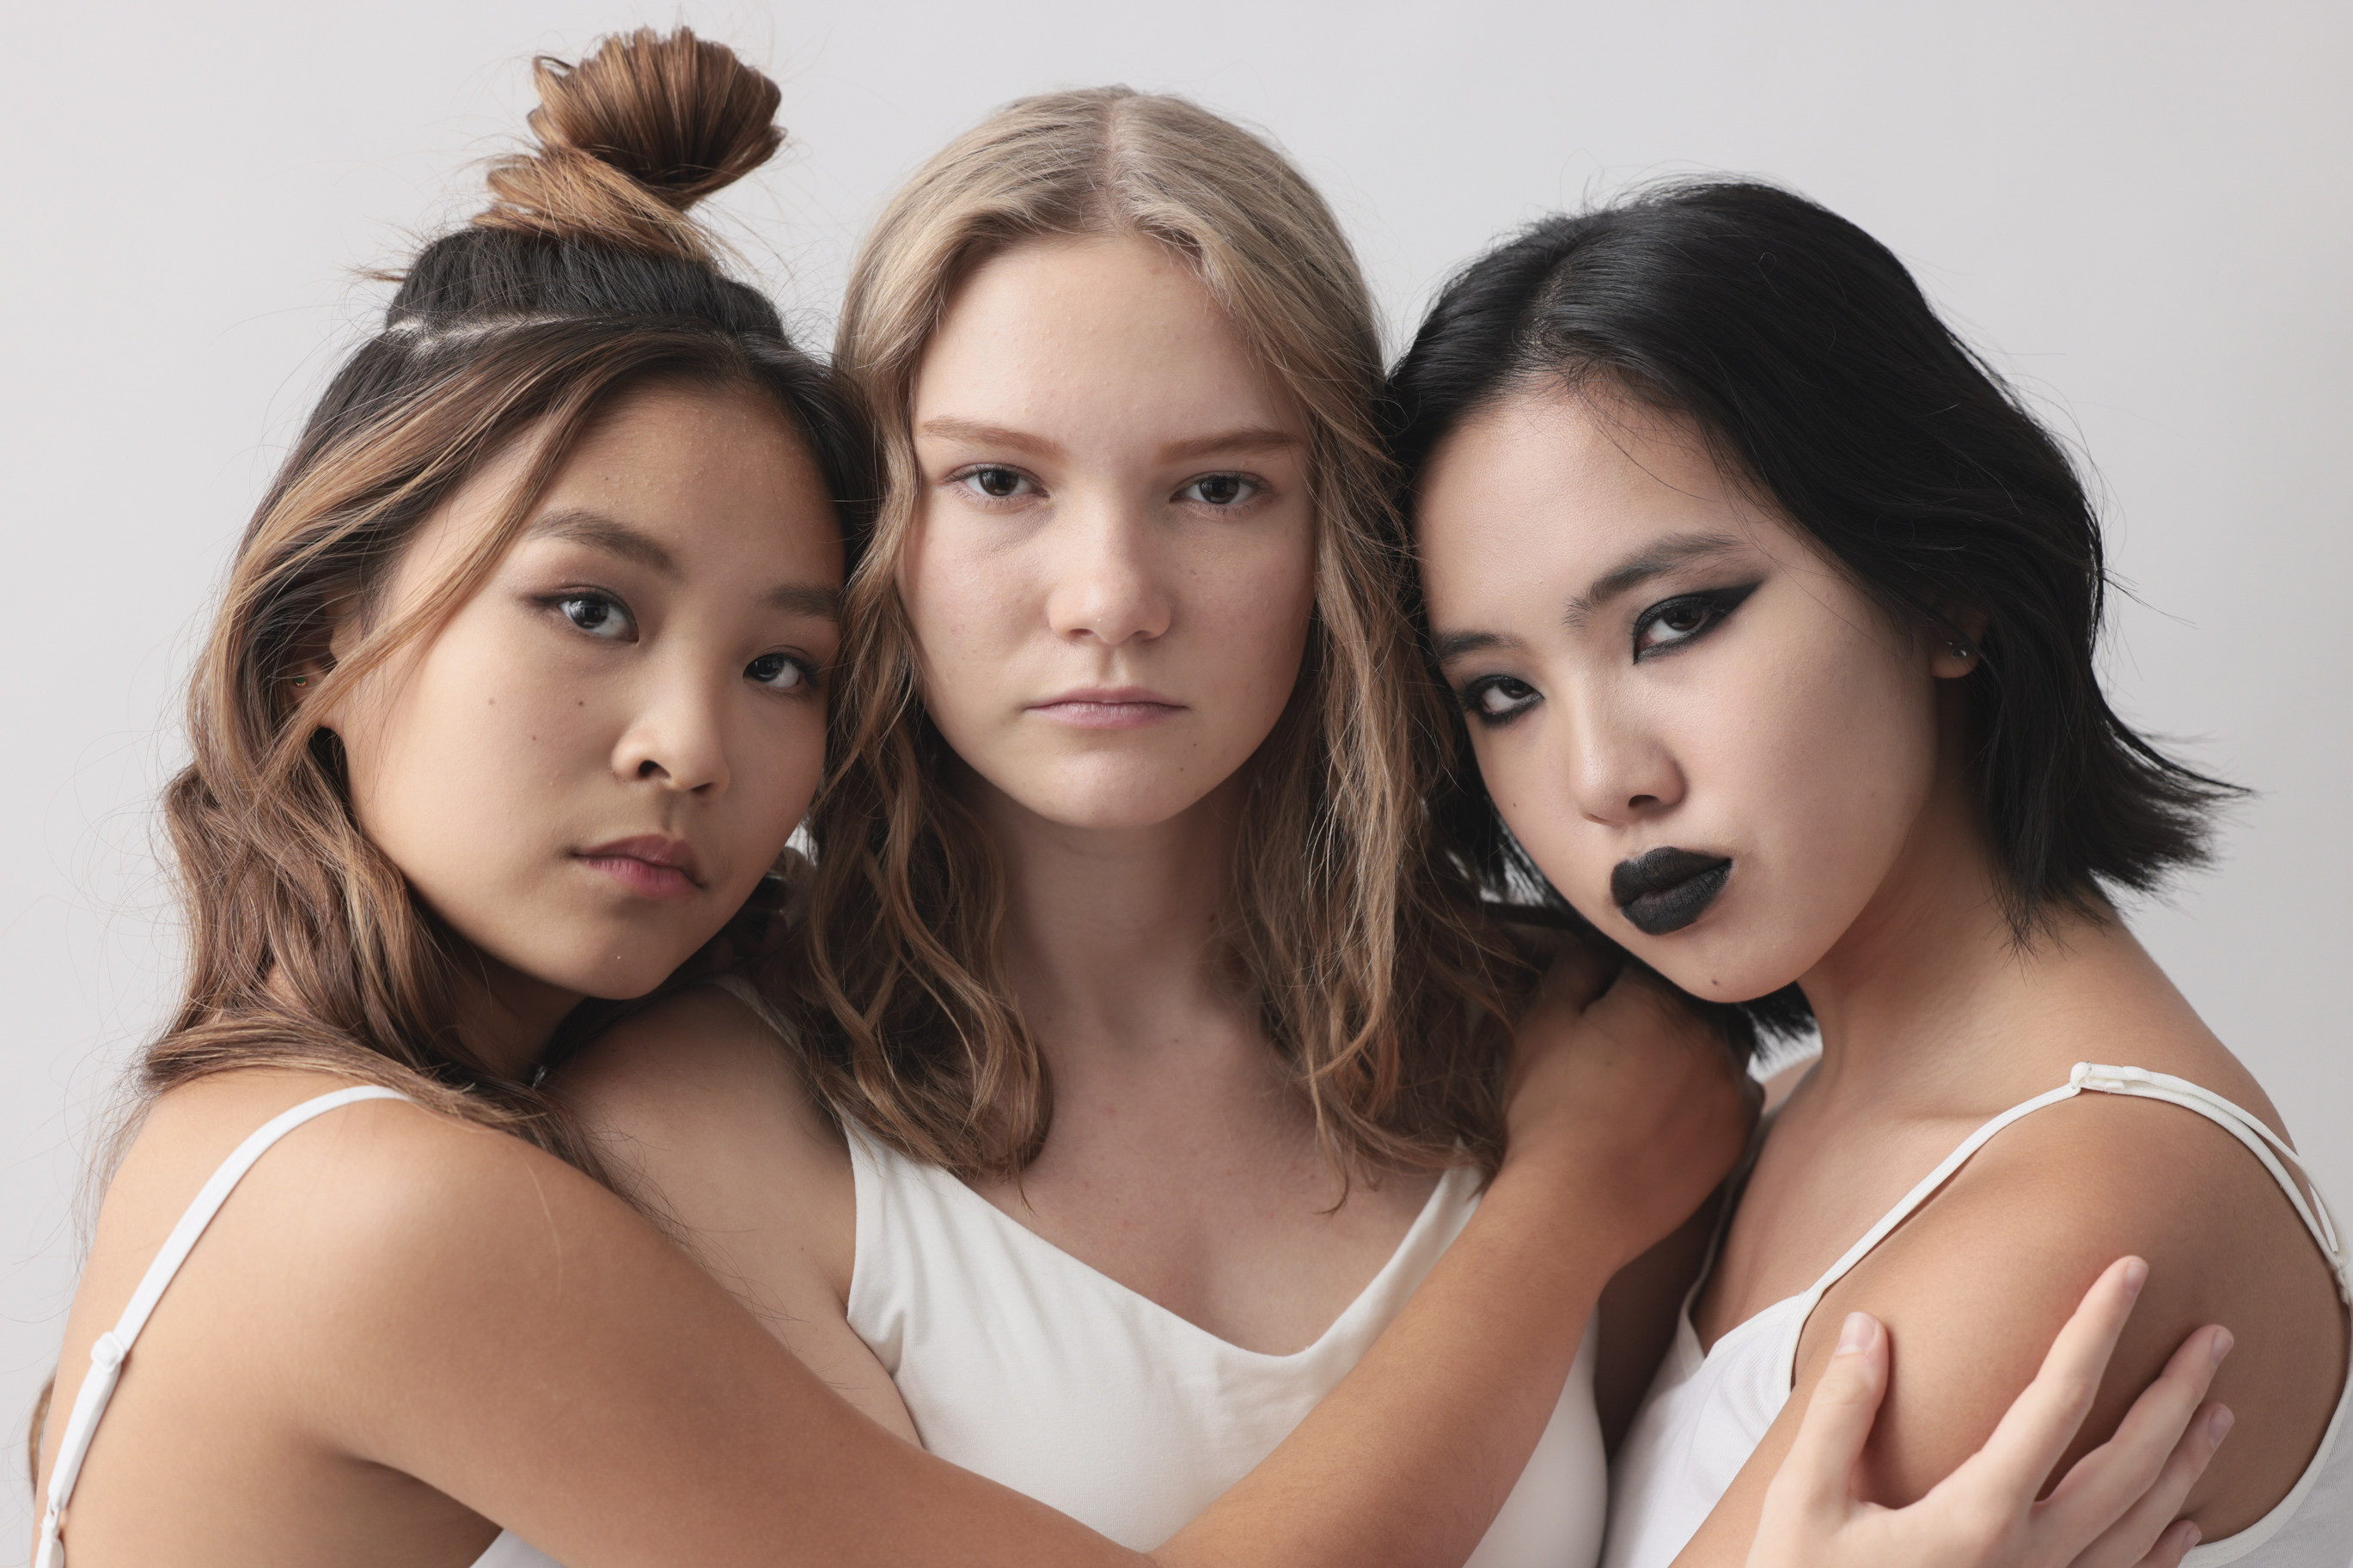 (From left) Jillian King Chan, Scotia Edwards and Creamy So star in “I’mperfect”, written by Hong Kong Youth Arts Foundation founder Lindsey McAlister. Photo: HKYAF